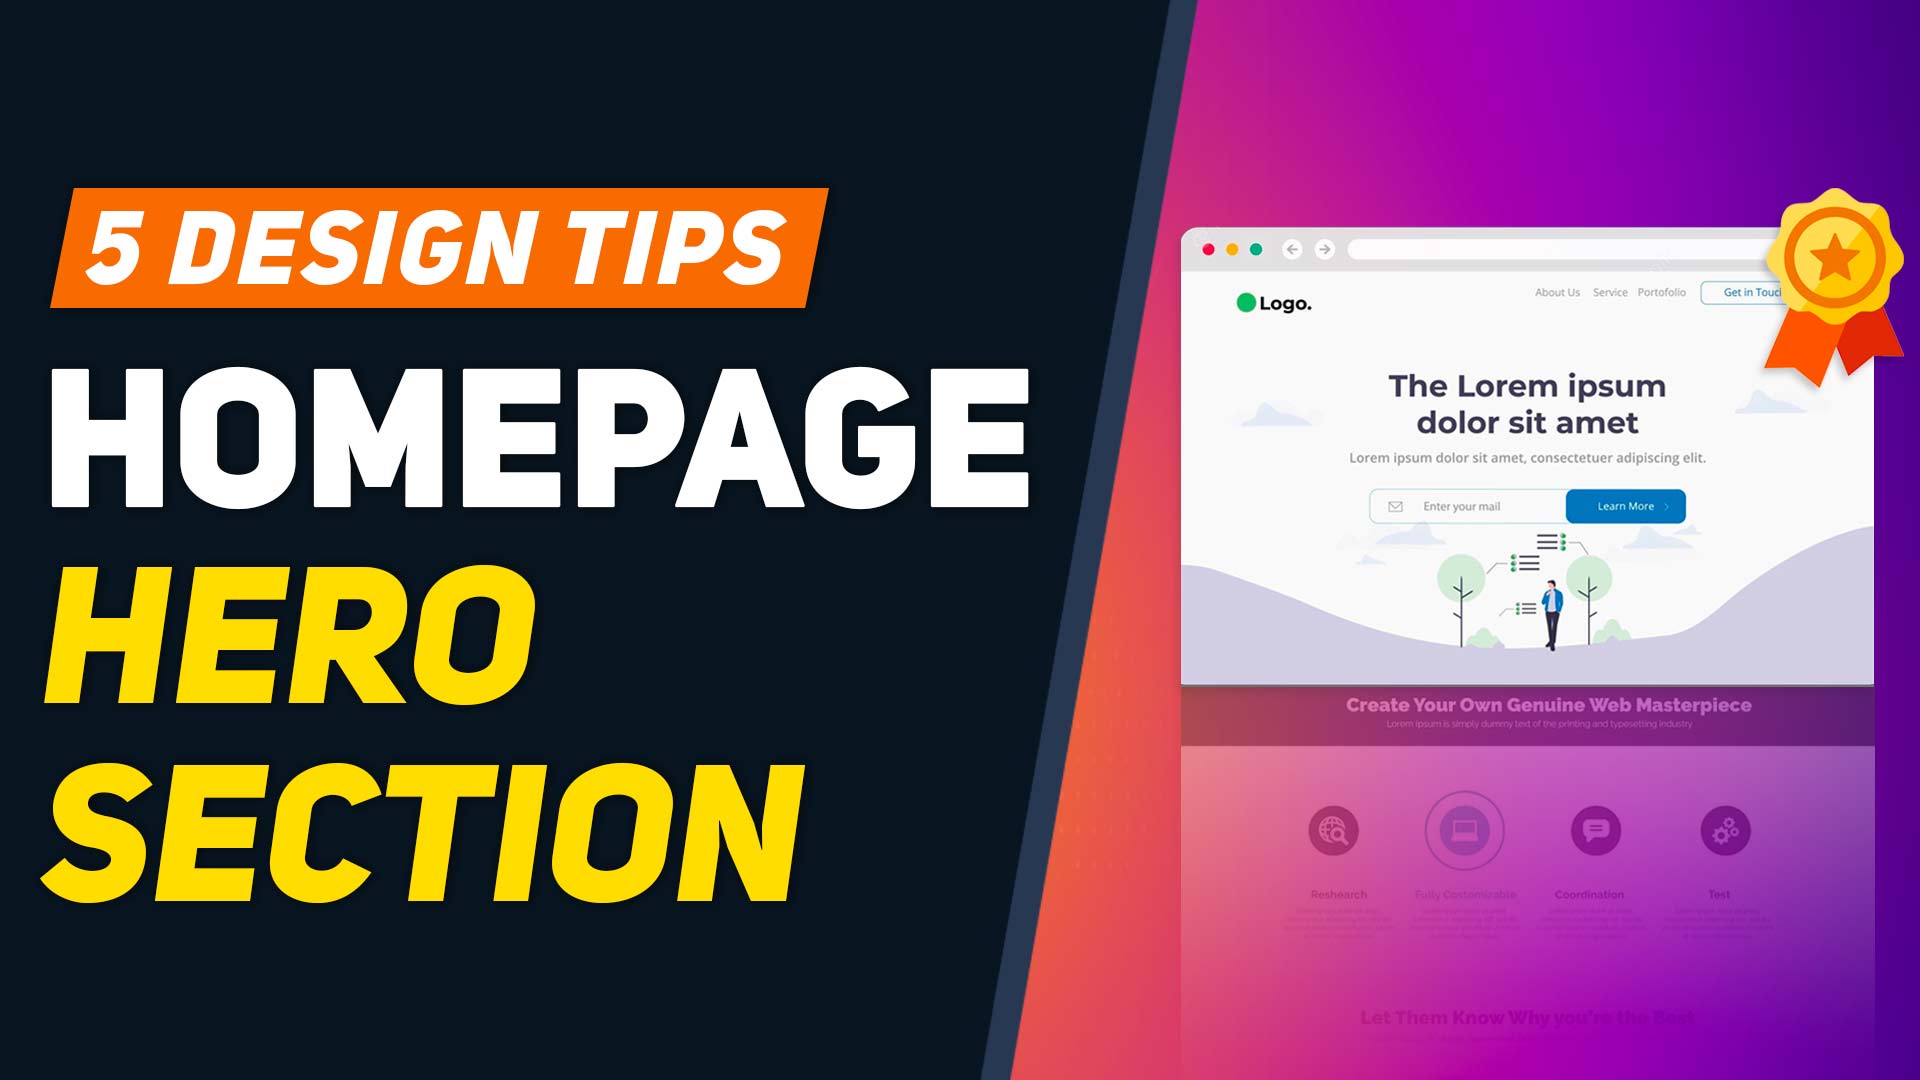 Maximize Conversions: 5 Tips to Increase Homepage Clicks & Engagement – TODAY!